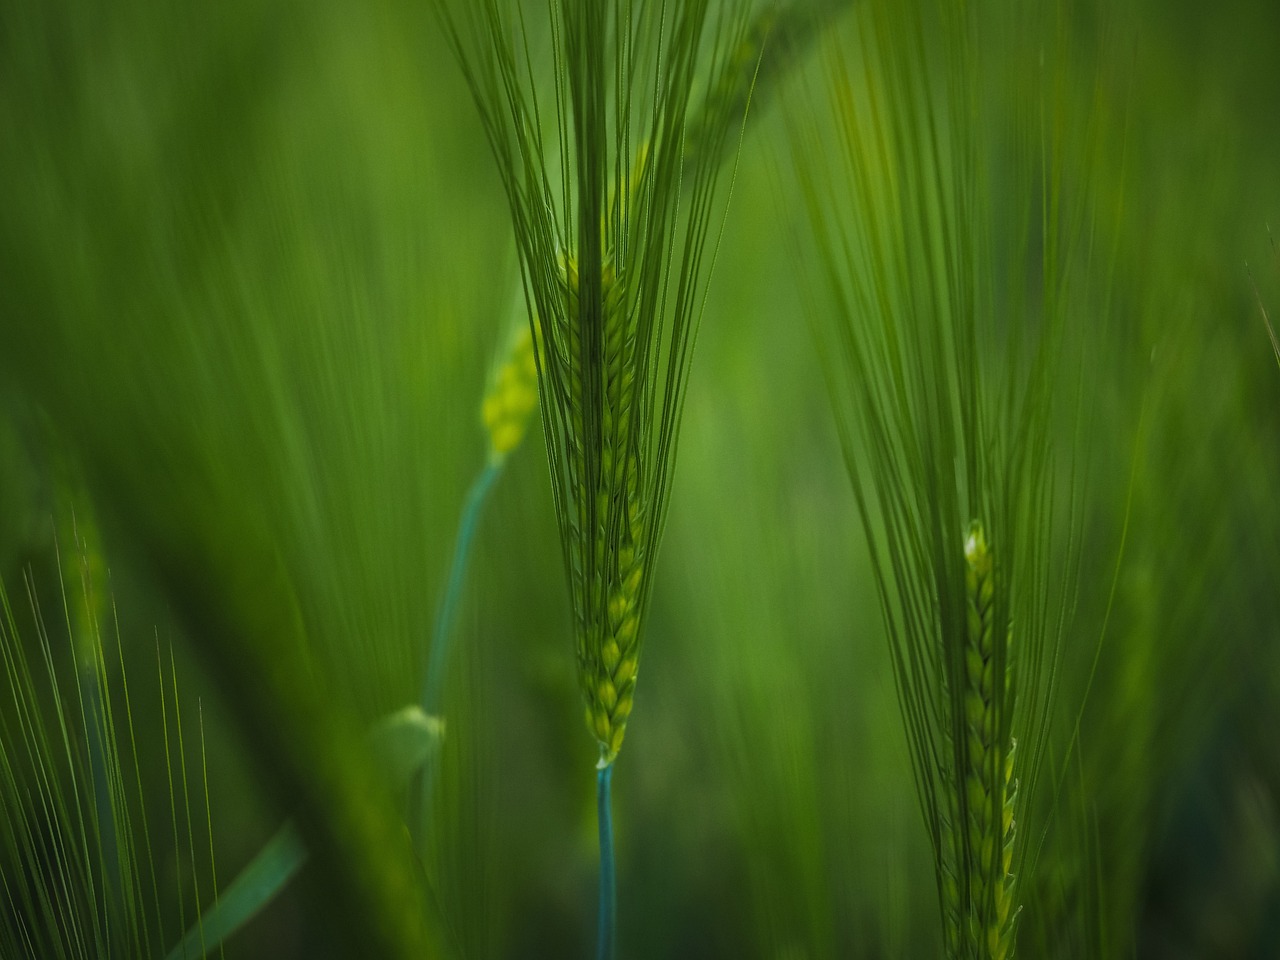 a close up of a bunch of green grass, a macro photograph, by Erwin Bowien, symbolism, blossom wheat fields, malt, post processed 4k, the tree is growing on a meadow